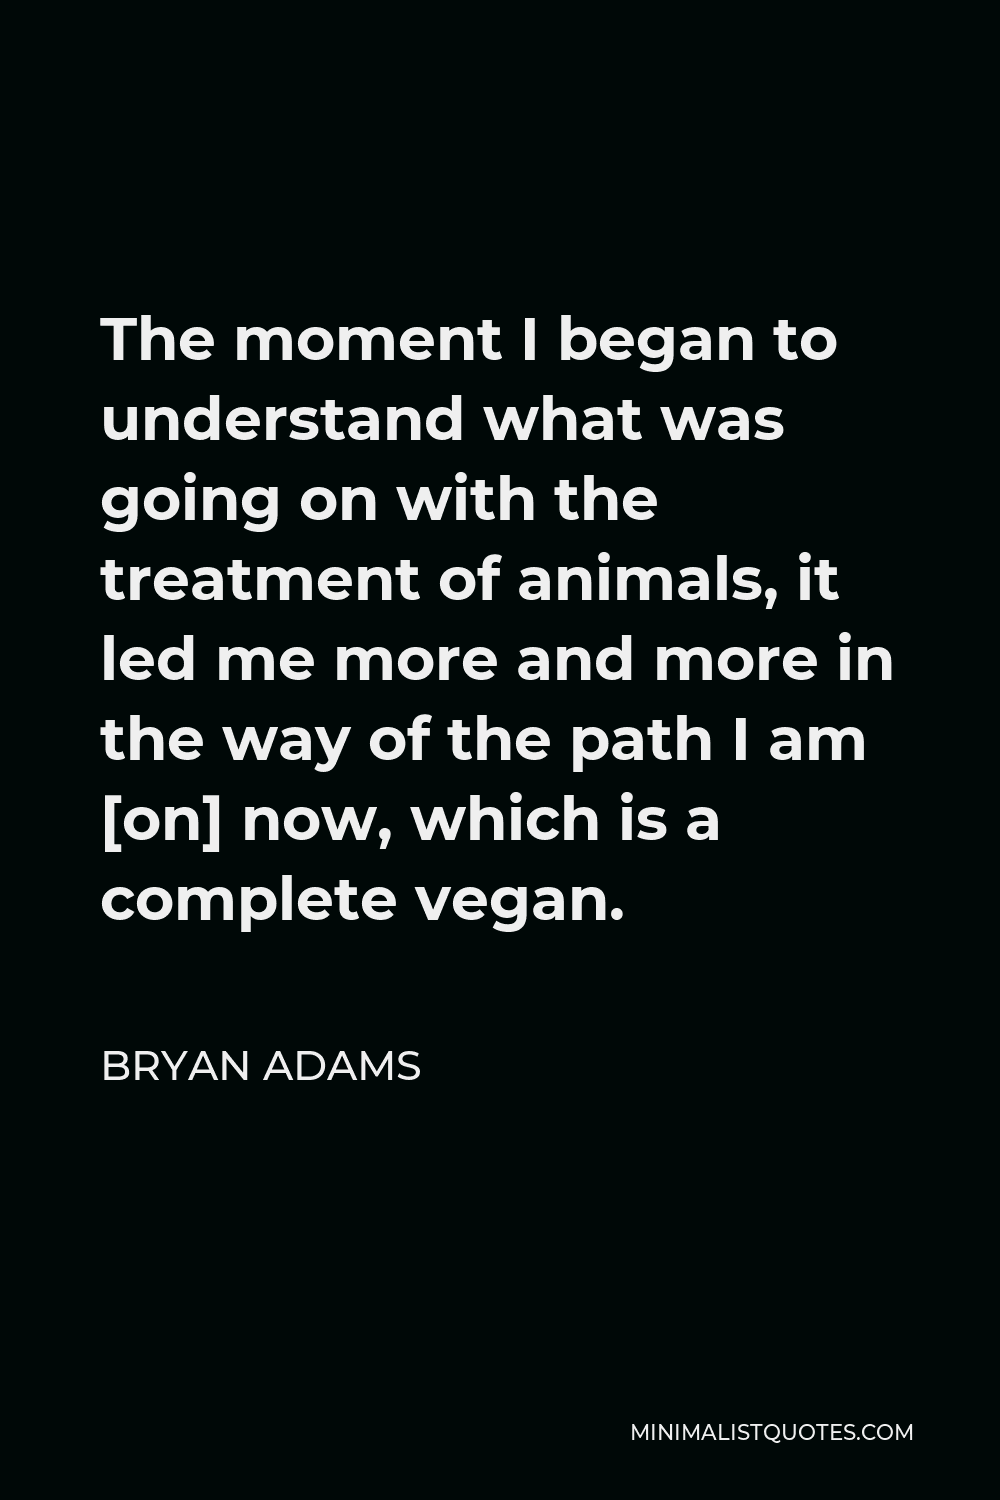 Bryan Adams Quote - The moment I began to understand what was going on with the treatment of animals, it led me more and more in the way of the path I am [on] now, which is a complete vegan.